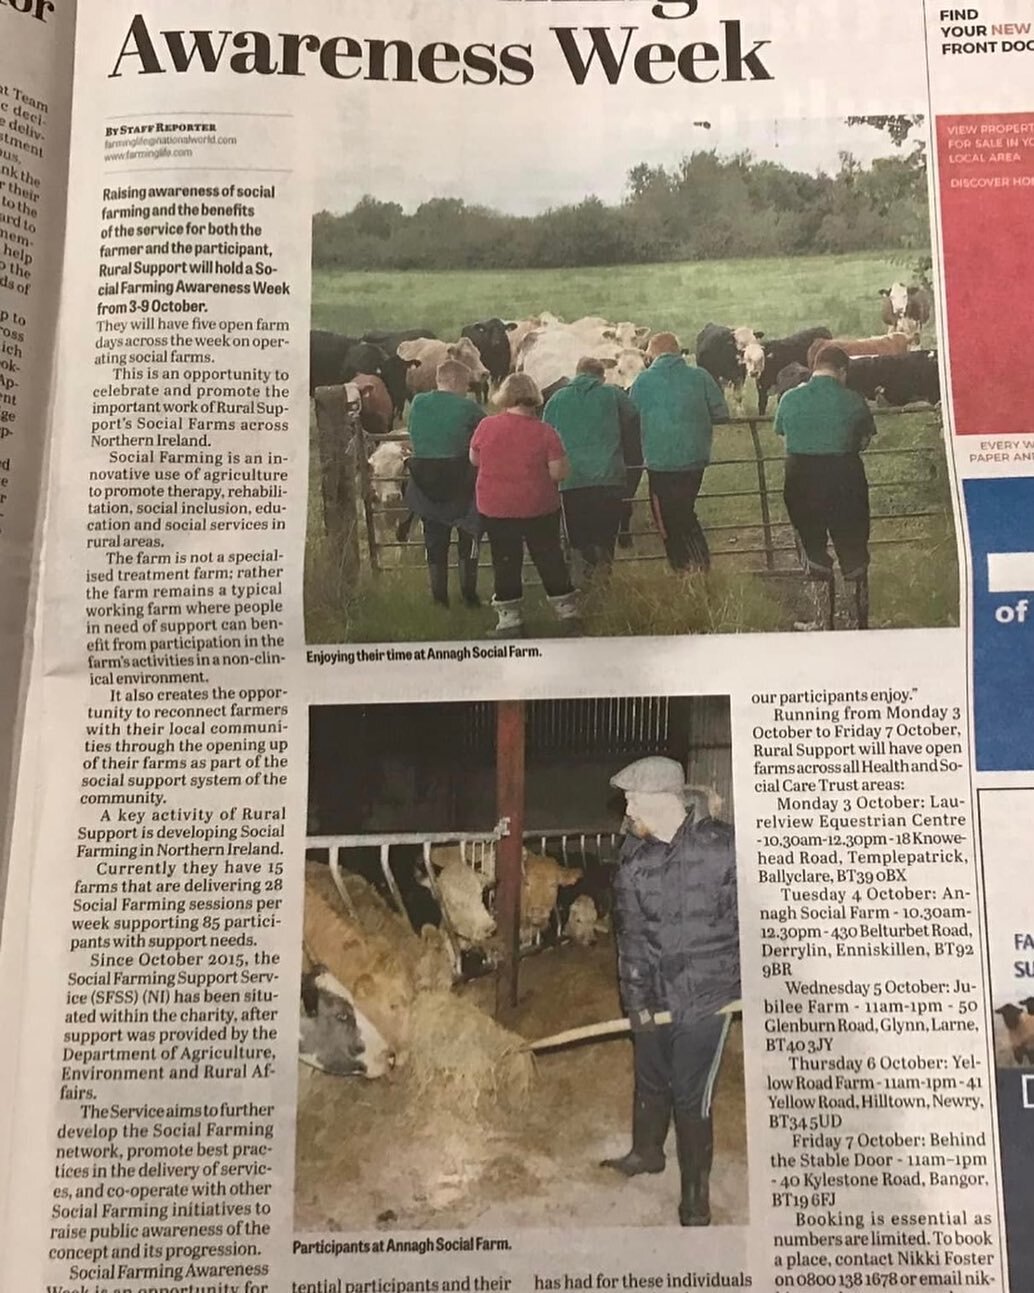 This week is Social Farming Awareness Week in Northern Ireland. Great article in Farming Life(24th Sept.22) sharing why we do what we do. Excited to be on the journey with @ruralsupportni and get their expertise and guidance. #socialfarmingni #rurals